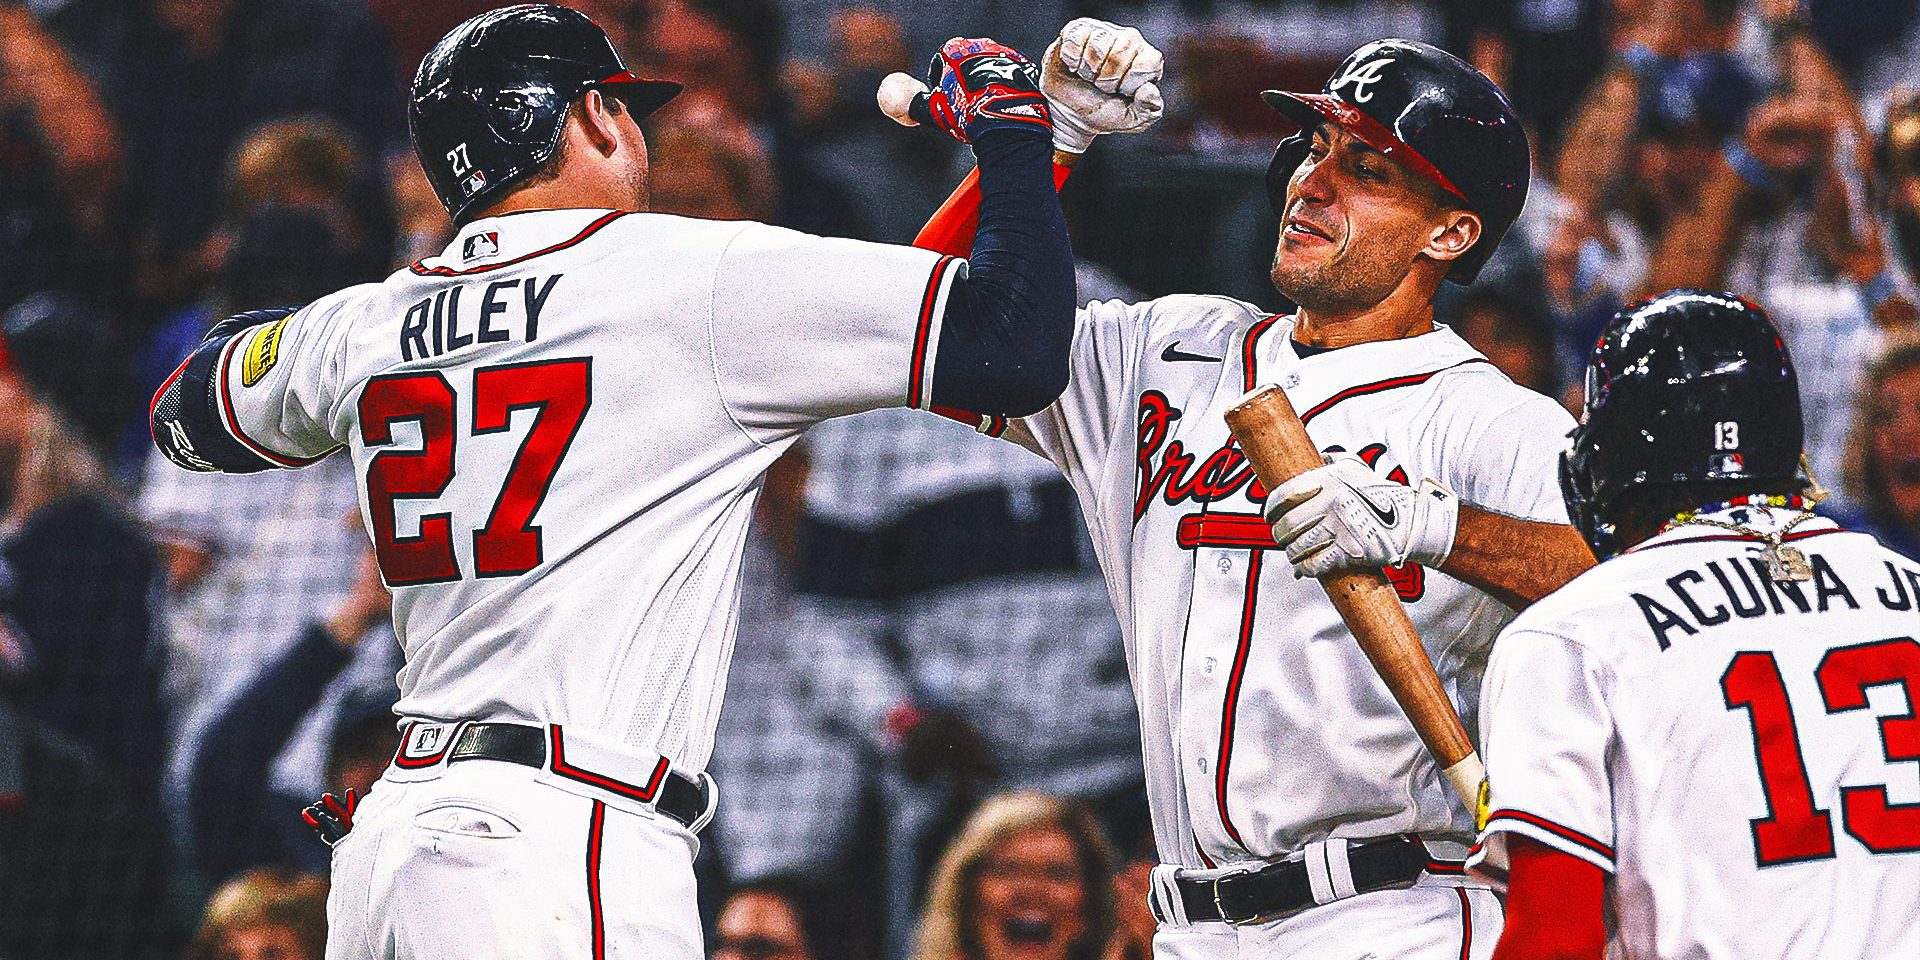 Braves rally to shock Phillies, tie up NLDS